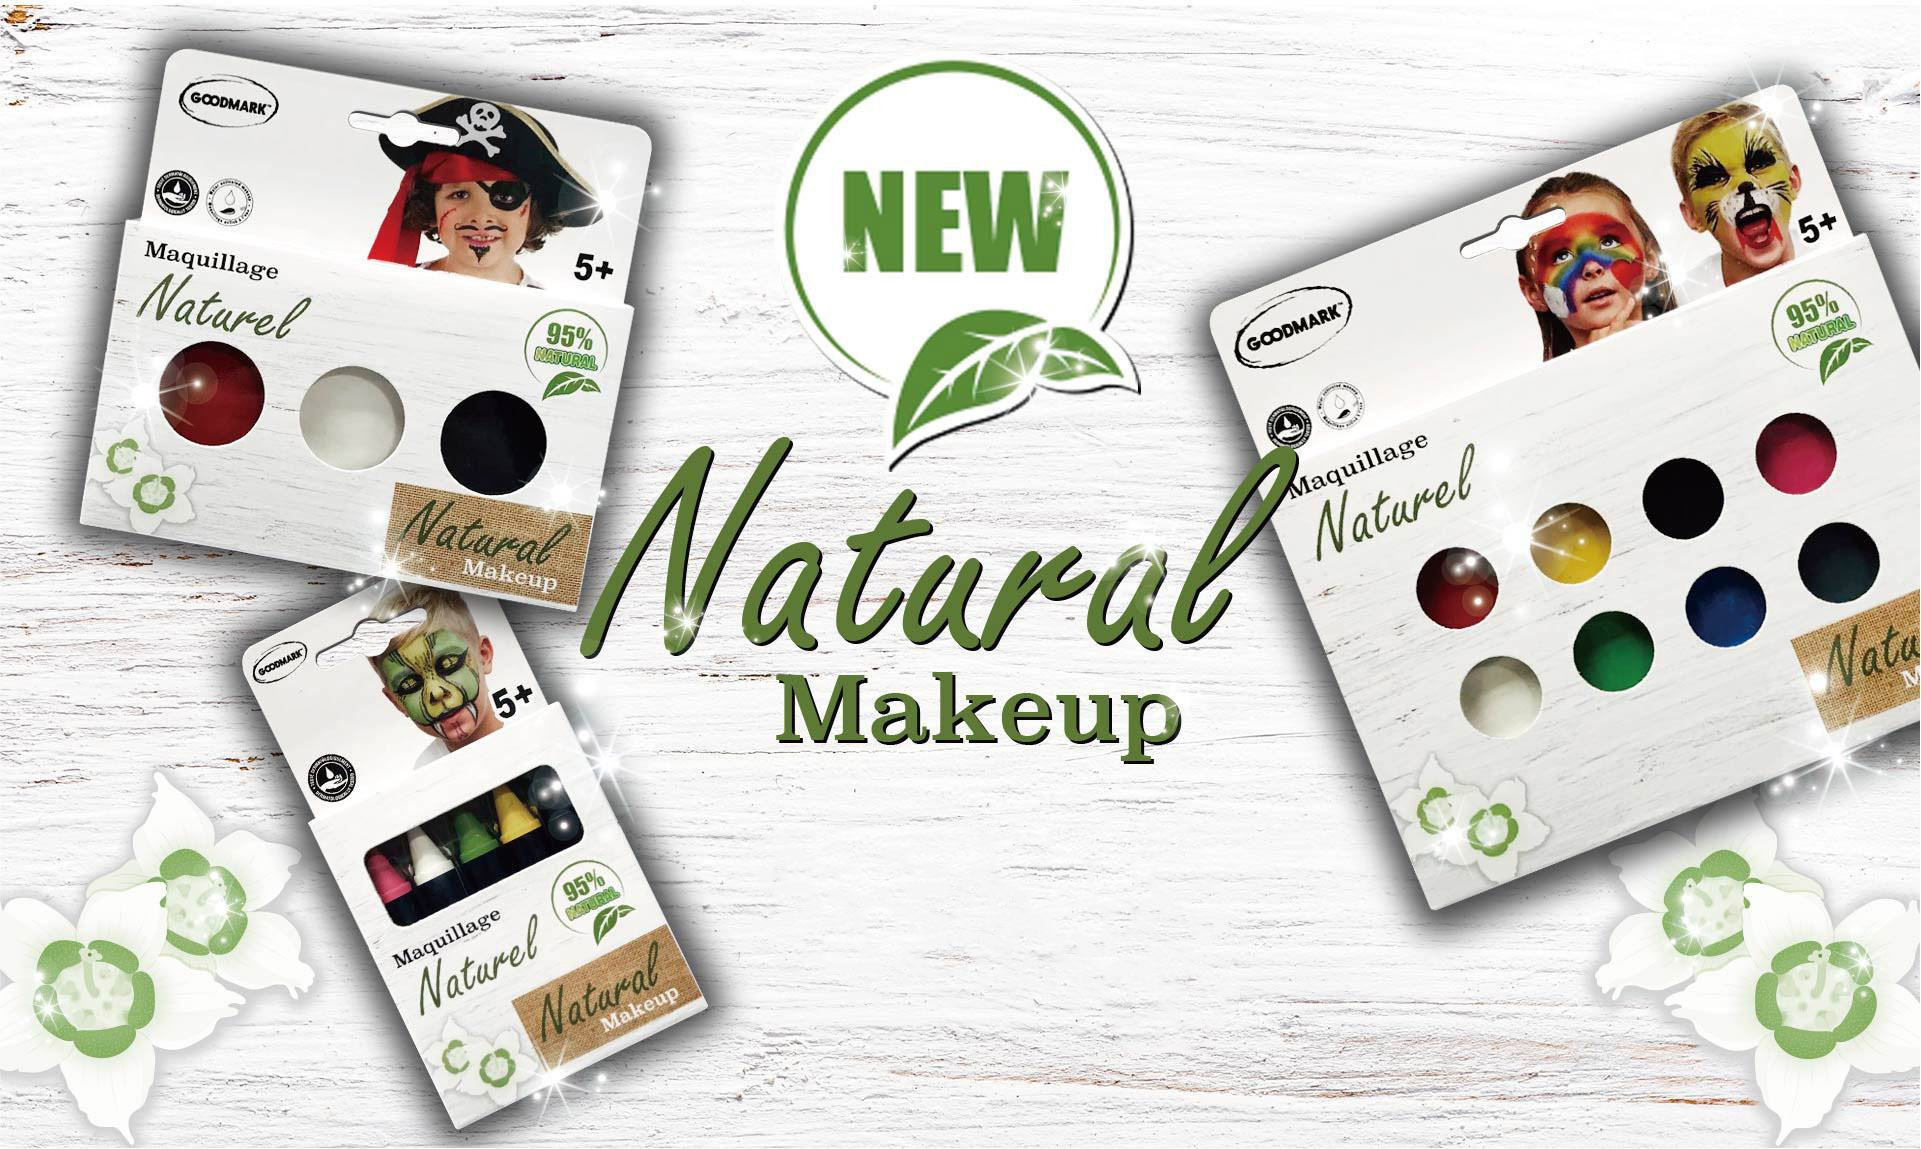 The Launch of Natural makeup